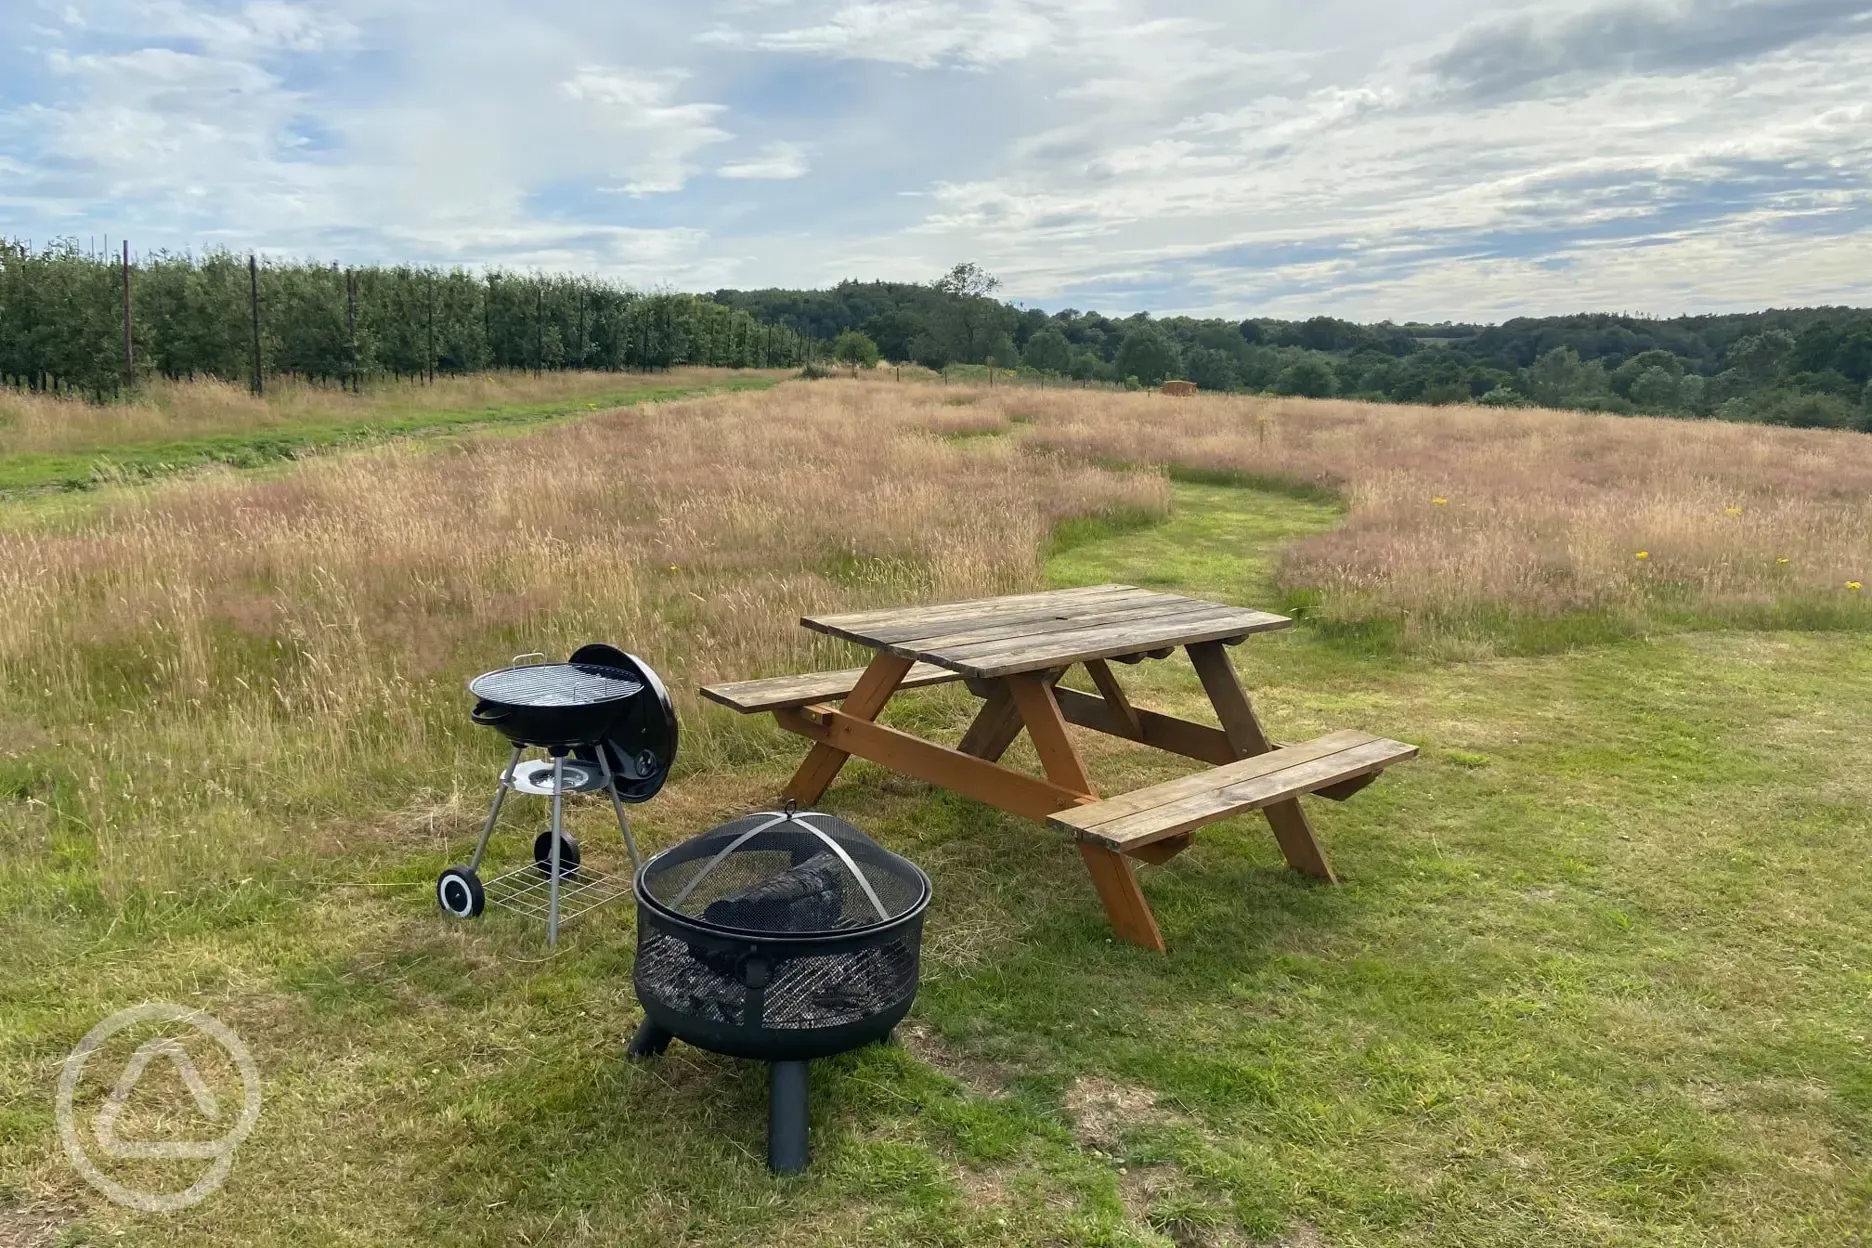 BBQ, Fire Pit and orchard